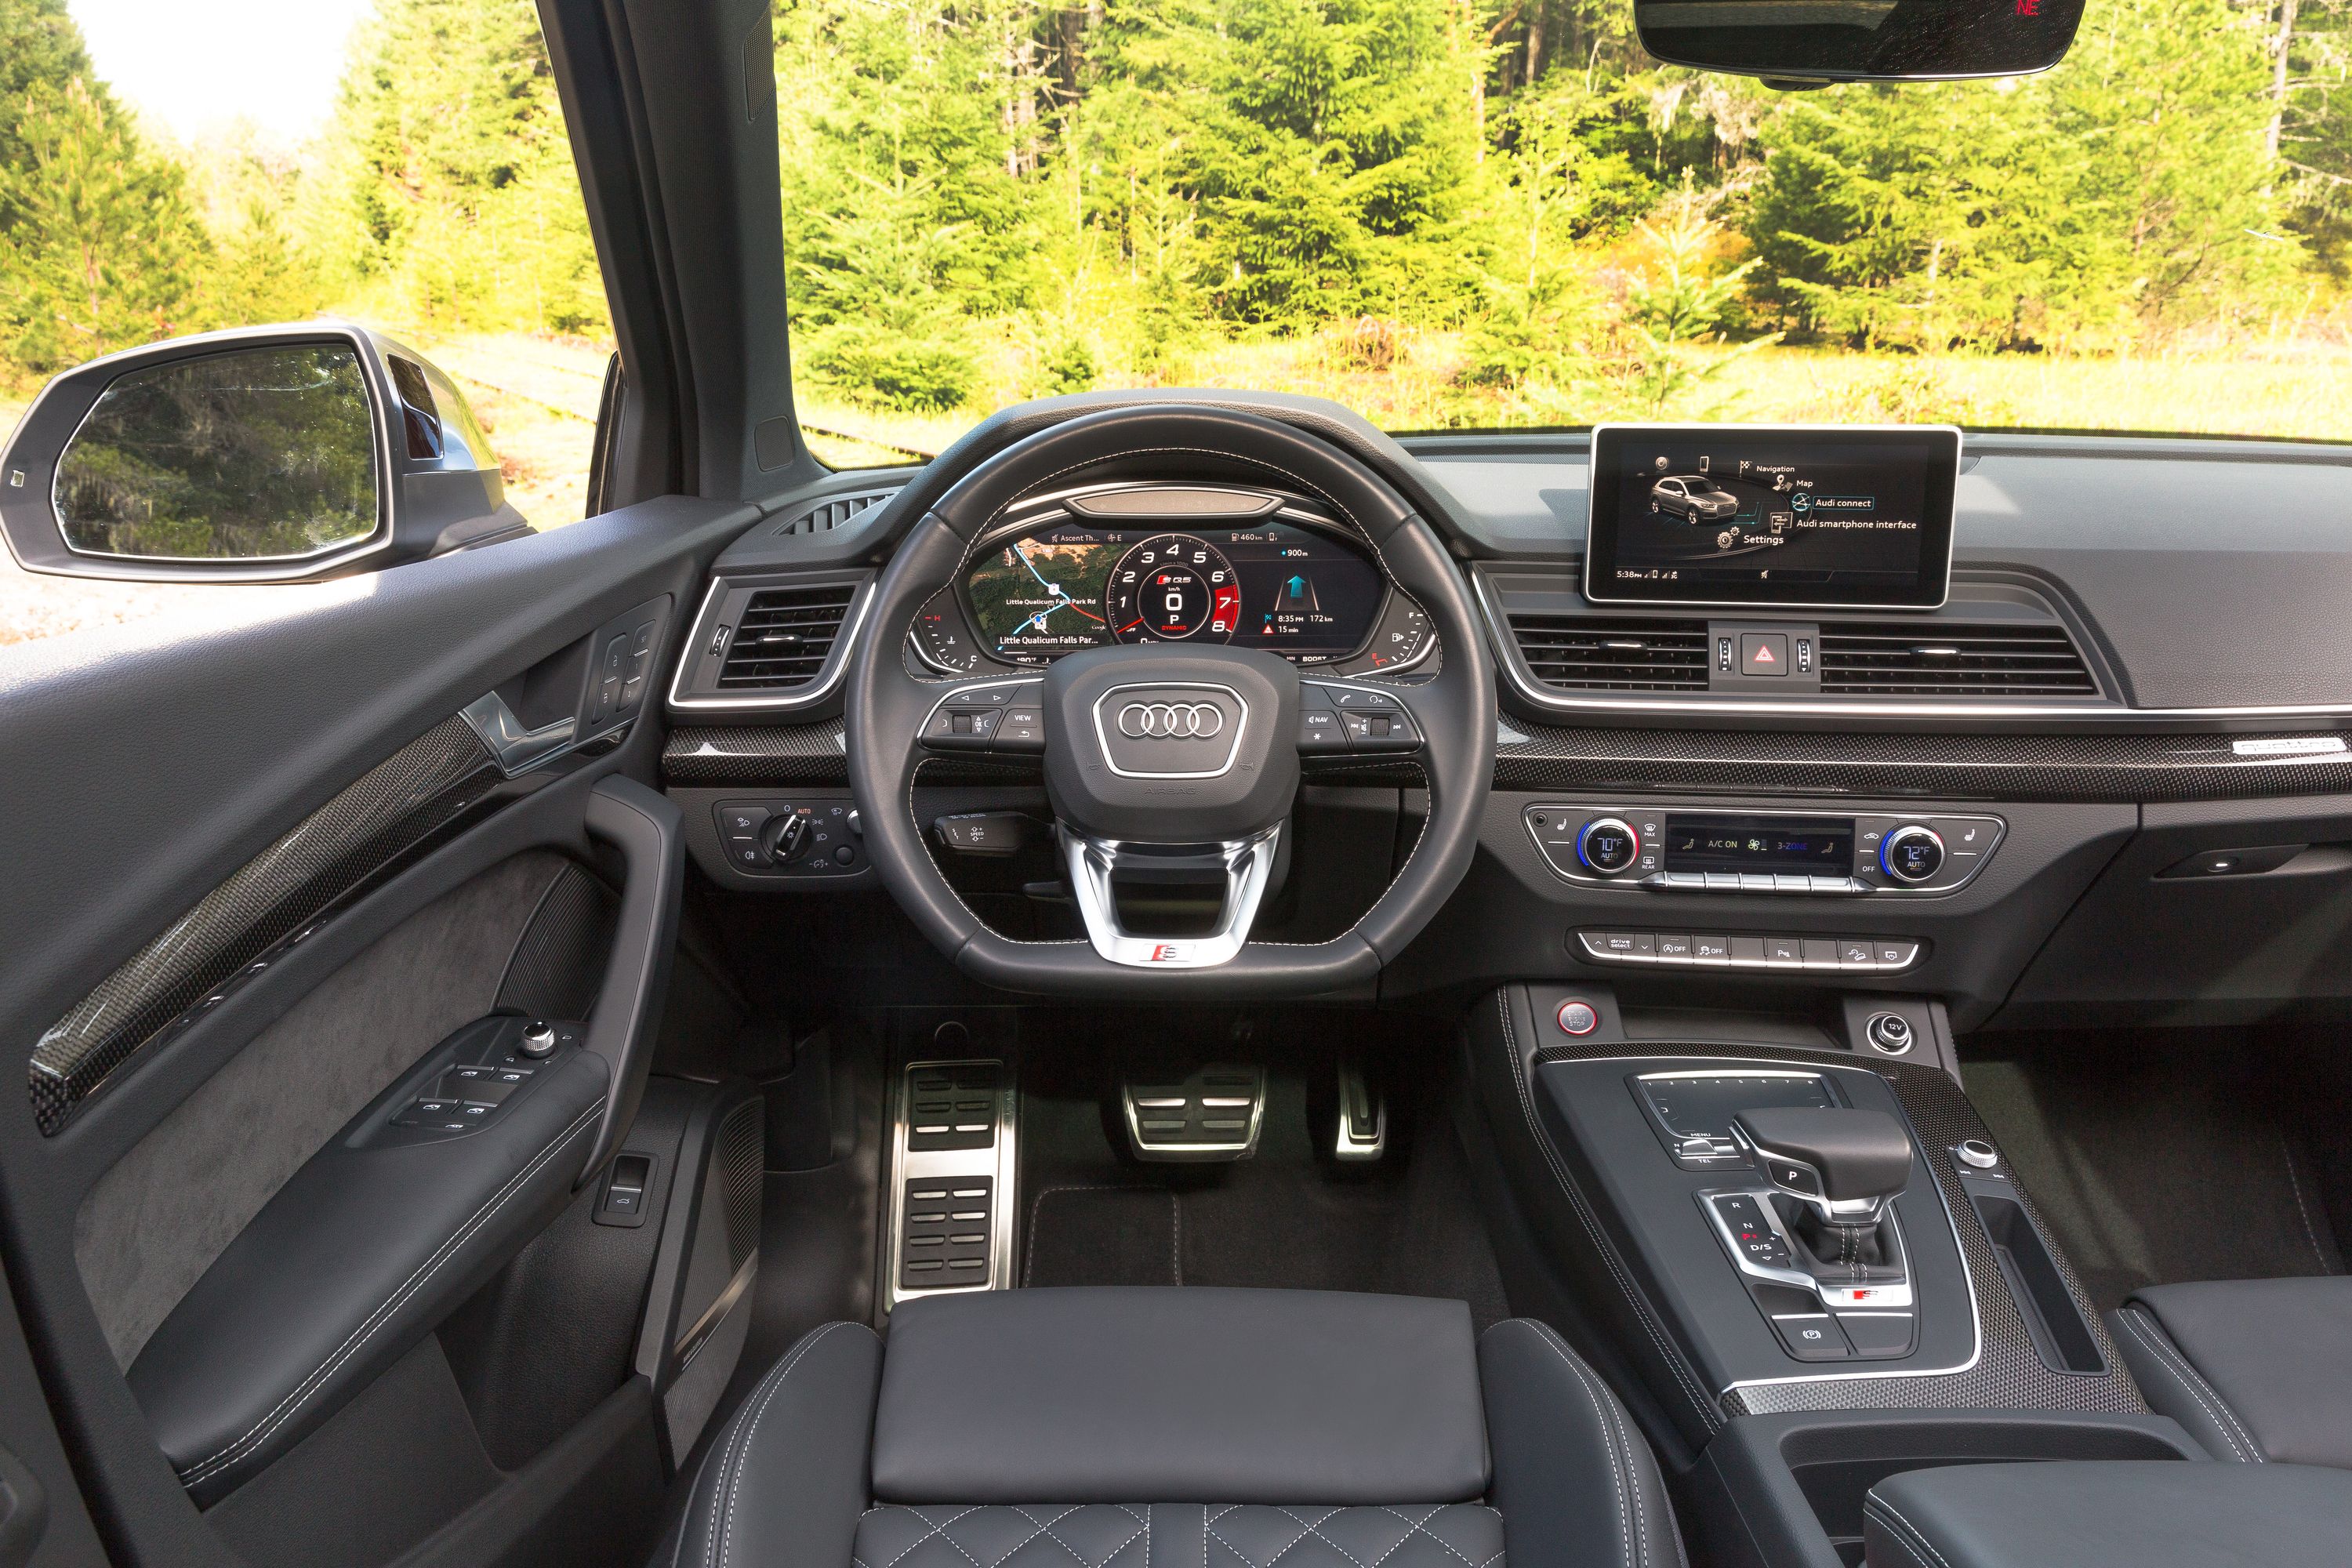 Audi SQ5 essentials The best kind of compromise